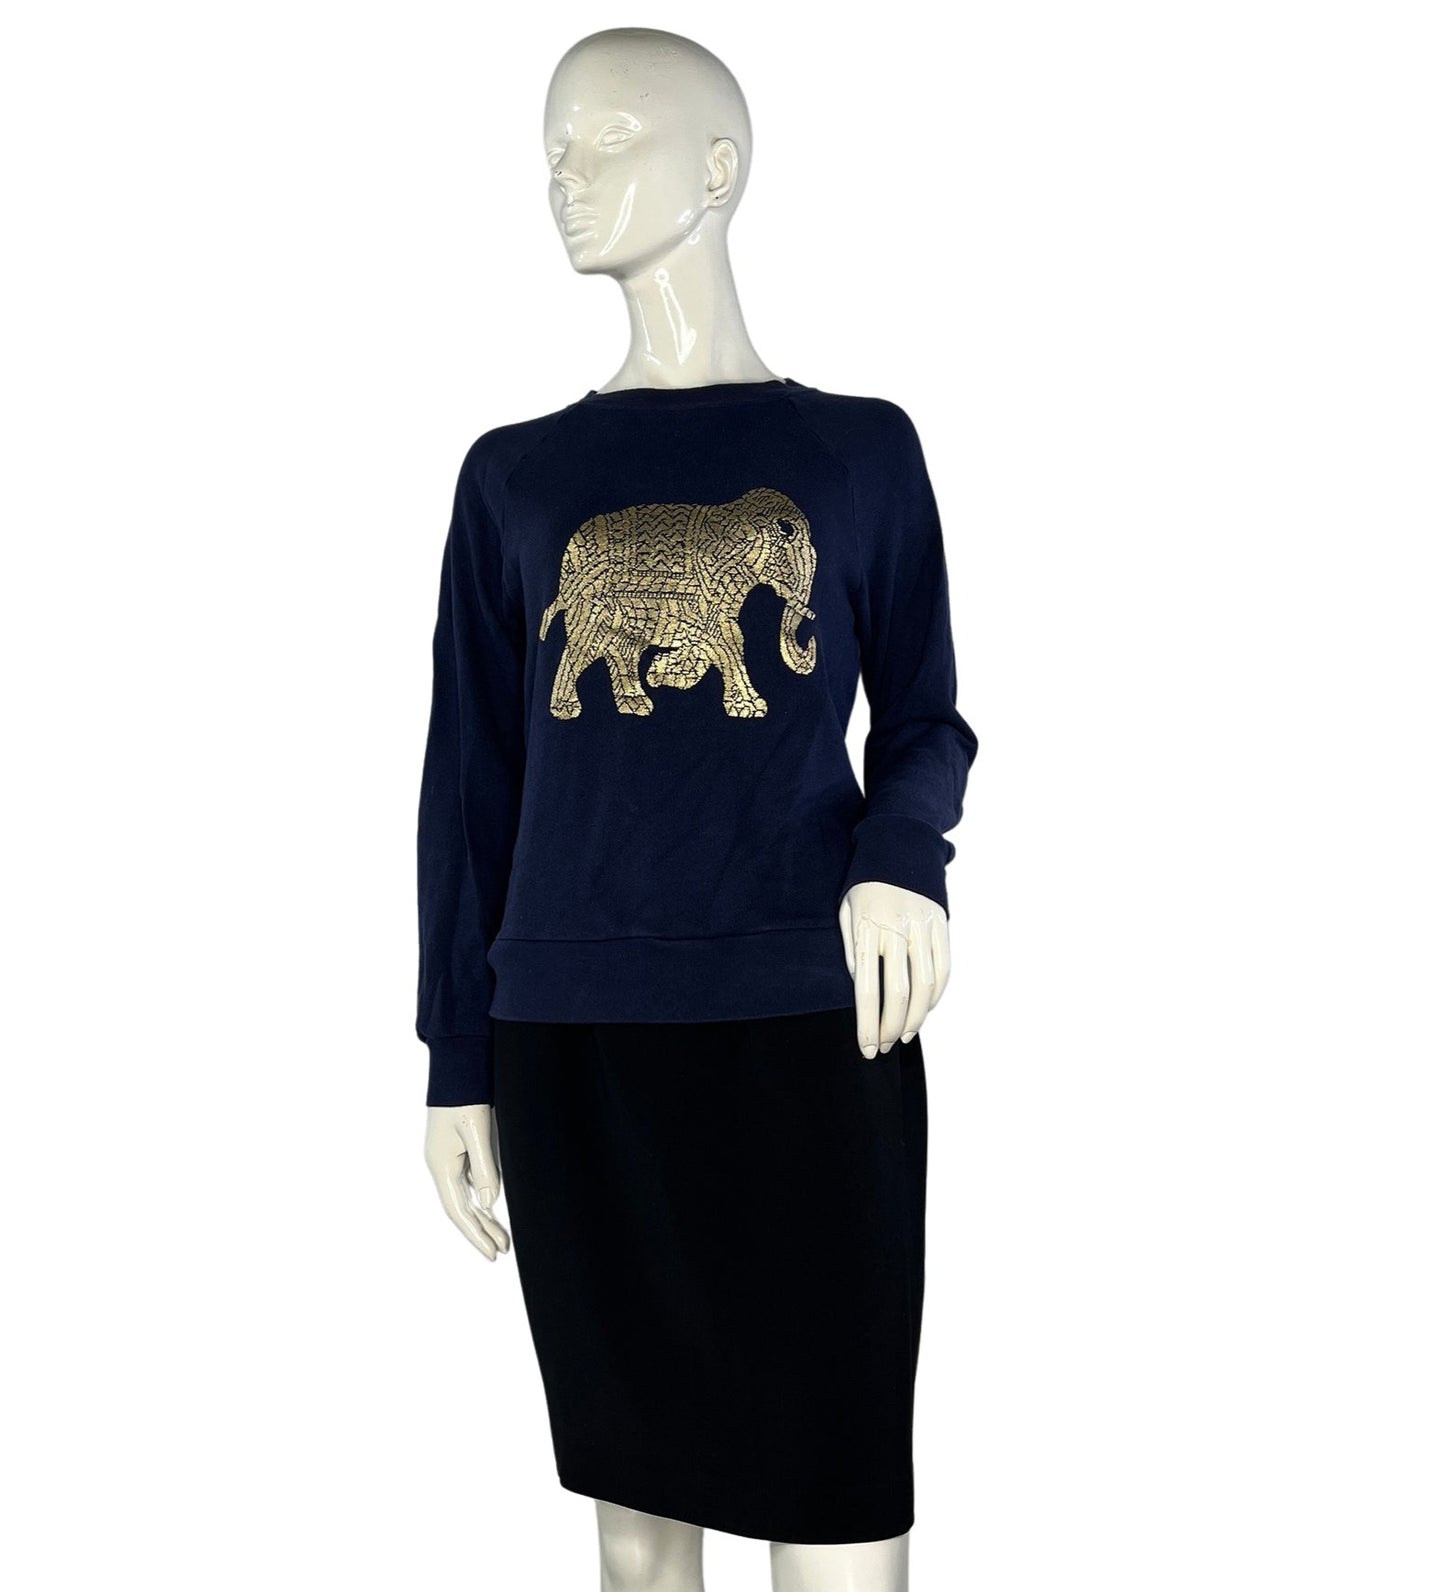 J. Crew Sweater Pull Over Elephant Graphic Navy, Gold Size S SKU 000218-14